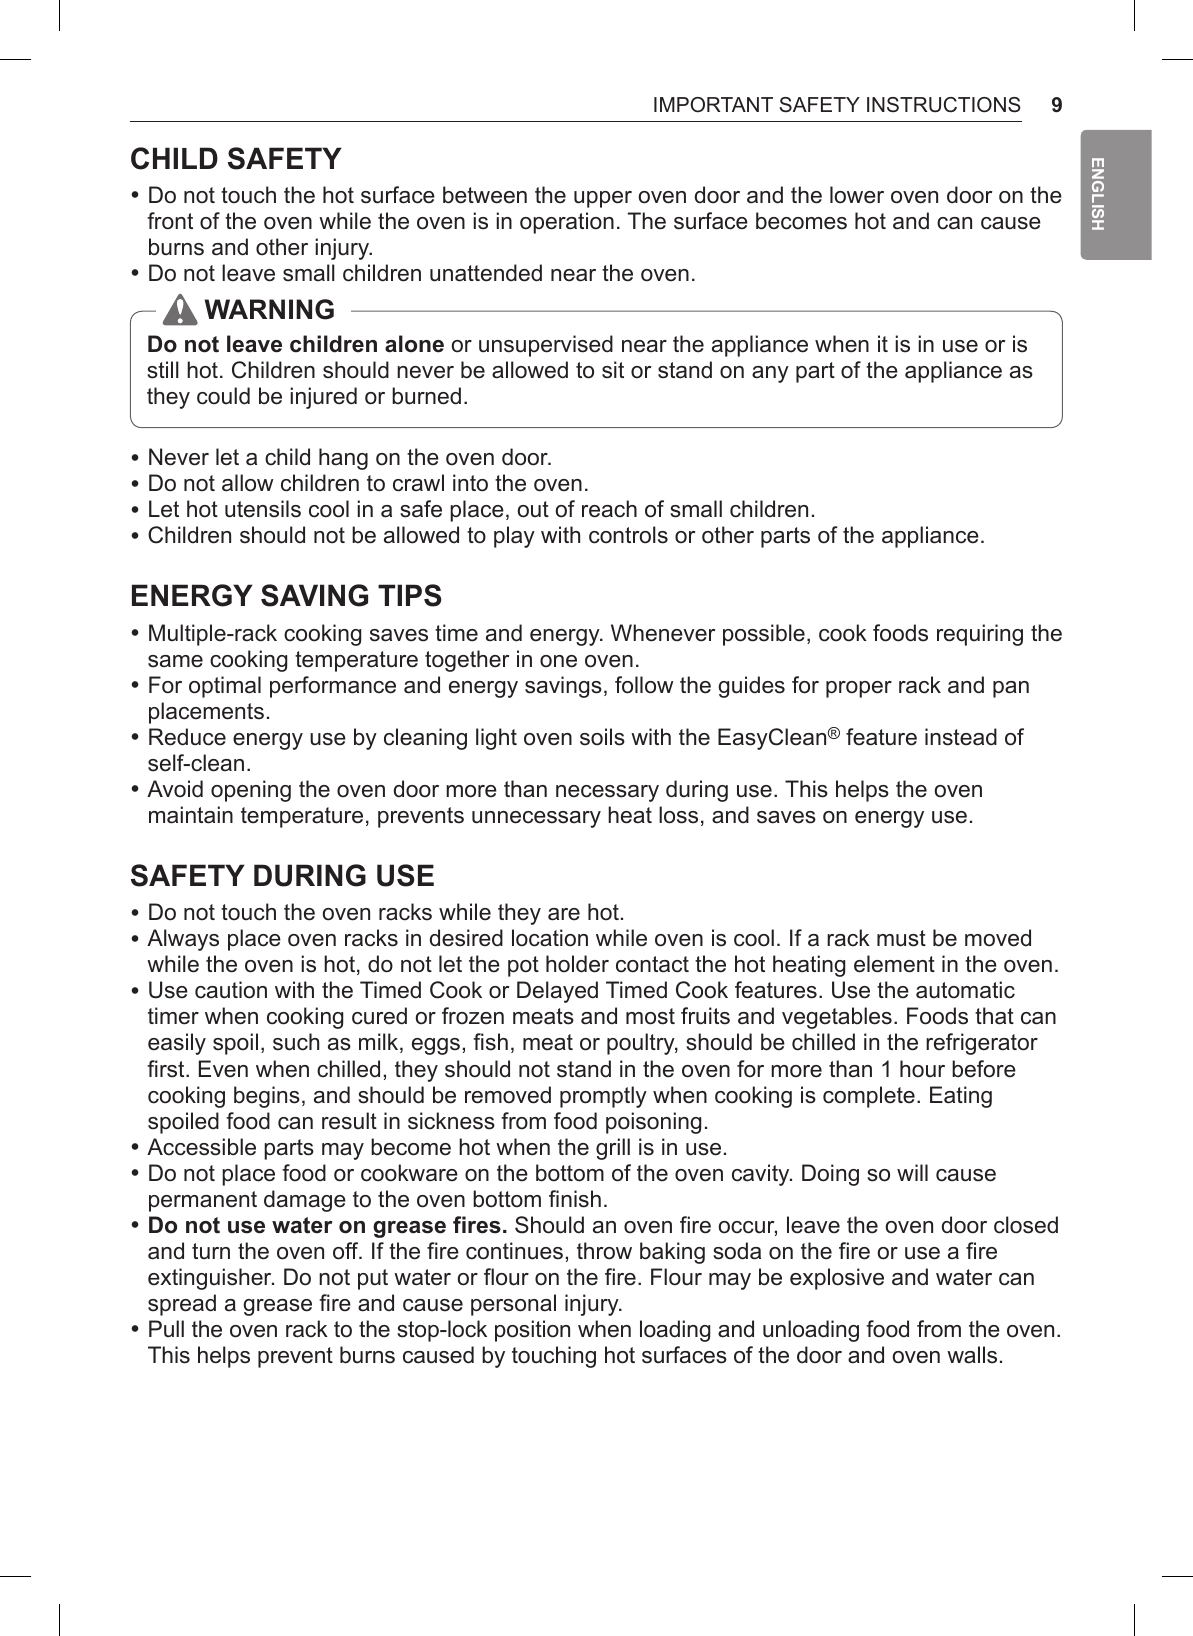 9IMPORTANT SAFETY INSTRUCTIONSENGLISHCHILD SAFETY •Do not touch the hot surface between the upper oven door and the lower oven door on the front of the oven while the oven is in operation. The surface becomes hot and can cause burns and other injury. •Do not leave small children unattended near the oven.WARNINGDo not leave children alone or unsupervised near the appliance when it is in use or is still hot. Children should never be allowed to sit or stand on any part of the appliance as they could be injured or burned. •Never let a child hang on the oven door. •Do not allow children to crawl into the oven. •Let hot utensils cool in a safe place, out of reach of small children. •Children should not be allowed to play with controls or other parts of the appliance.ENERGY SAVING TIPS •Multiple-rack cooking saves time and energy. Whenever possible, cook foods requiring the same cooking temperature together in one oven. •For optimal performance and energy savings, follow the guides for proper rack and pan placements. •Reduce energy use by cleaning light oven soils with the EasyClean® feature instead of self-clean. •Avoid opening the oven door more than necessary during use. This helps the oven maintain temperature, prevents unnecessary heat loss, and saves on energy use.SAFETY DURING USE •Do not touch the oven racks while they are hot. •Always place oven racks in desired location while oven is cool. If a rack must be moved while the oven is hot, do not let the pot holder contact the hot heating element in the oven. •Use caution with the Timed Cook or Delayed Timed Cook features. Use the automatic timer when cooking cured or frozen meats and most fruits and vegetables. Foods that can easily spoil, such as milk, eggs, fish, meat or poultry, should be chilled in the refrigerator first. Even when chilled, they should not stand in the oven for more than 1 hour before cooking begins, and should be removed promptly when cooking is complete. Eating spoiled food can result in sickness from food poisoning. •Accessible parts may become hot when the grill is in use. •Do not place food or cookware on the bottom of the oven cavity. Doing so will cause permanent damage to the oven bottom finish. •Do not use water on grease fires. Should an oven fire occur, leave the oven door closed and turn the oven off. If the fire continues, throw baking soda on the fire or use a fire extinguisher. Do not put water or flour on the fire. Flour may be explosive and water can spread a grease fire and cause personal injury. •Pull the oven rack to the stop-lock position when loading and unloading food from the oven. This helps prevent burns caused by touching hot surfaces of the door and oven walls.